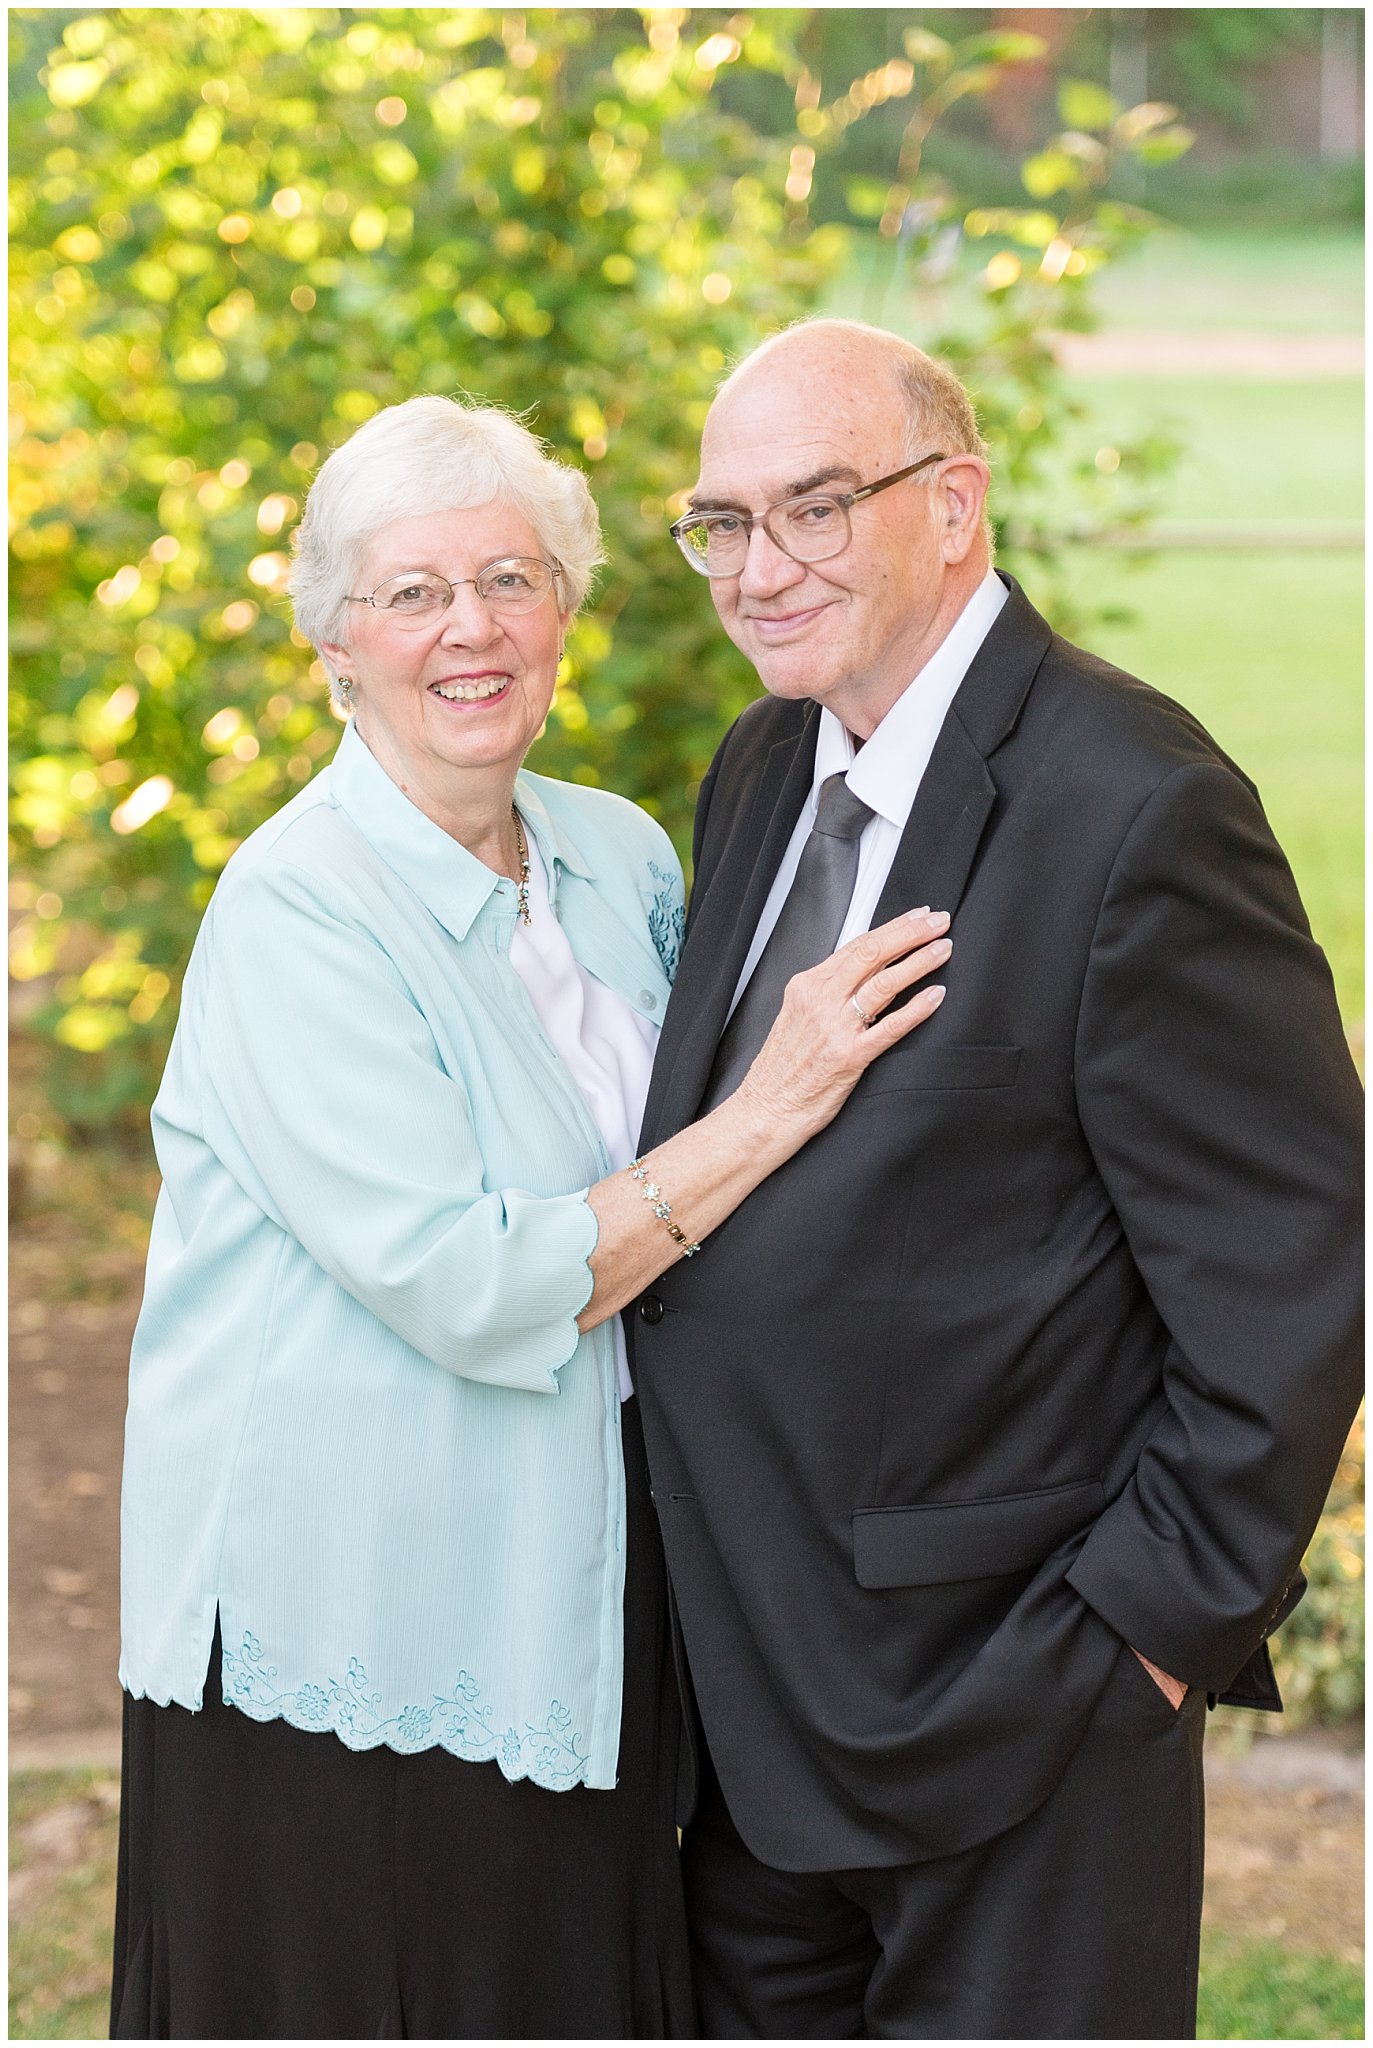 Older couple smiling at the camera surrounded by trees | Layton Commons Park | Layton Couples Photographer | Jessie and Dallin